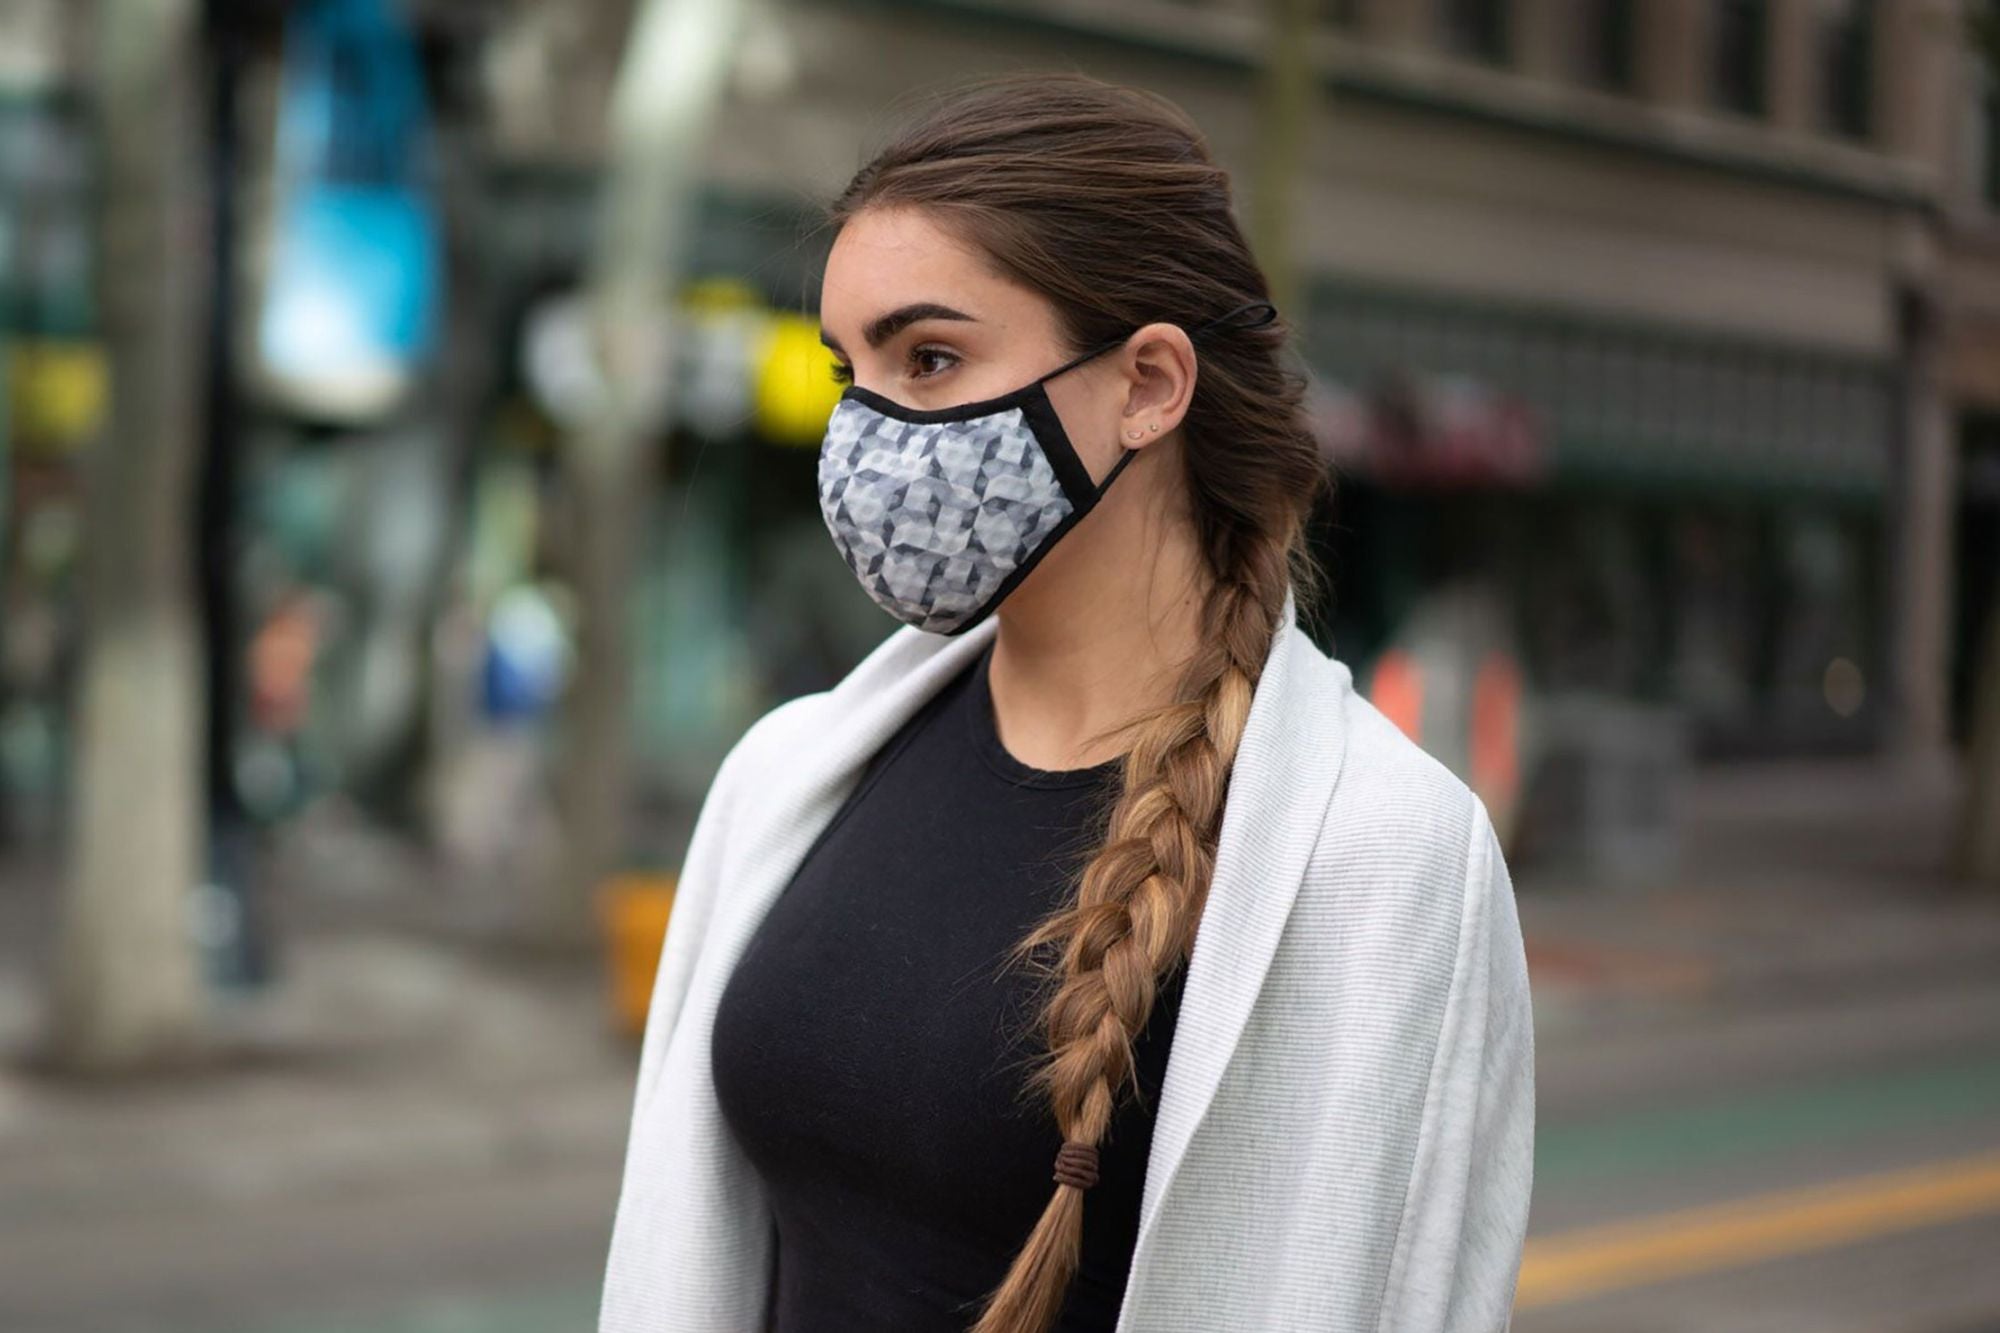 This Air Mask Company Struggled to Take Off. Then Came Coronavirus.